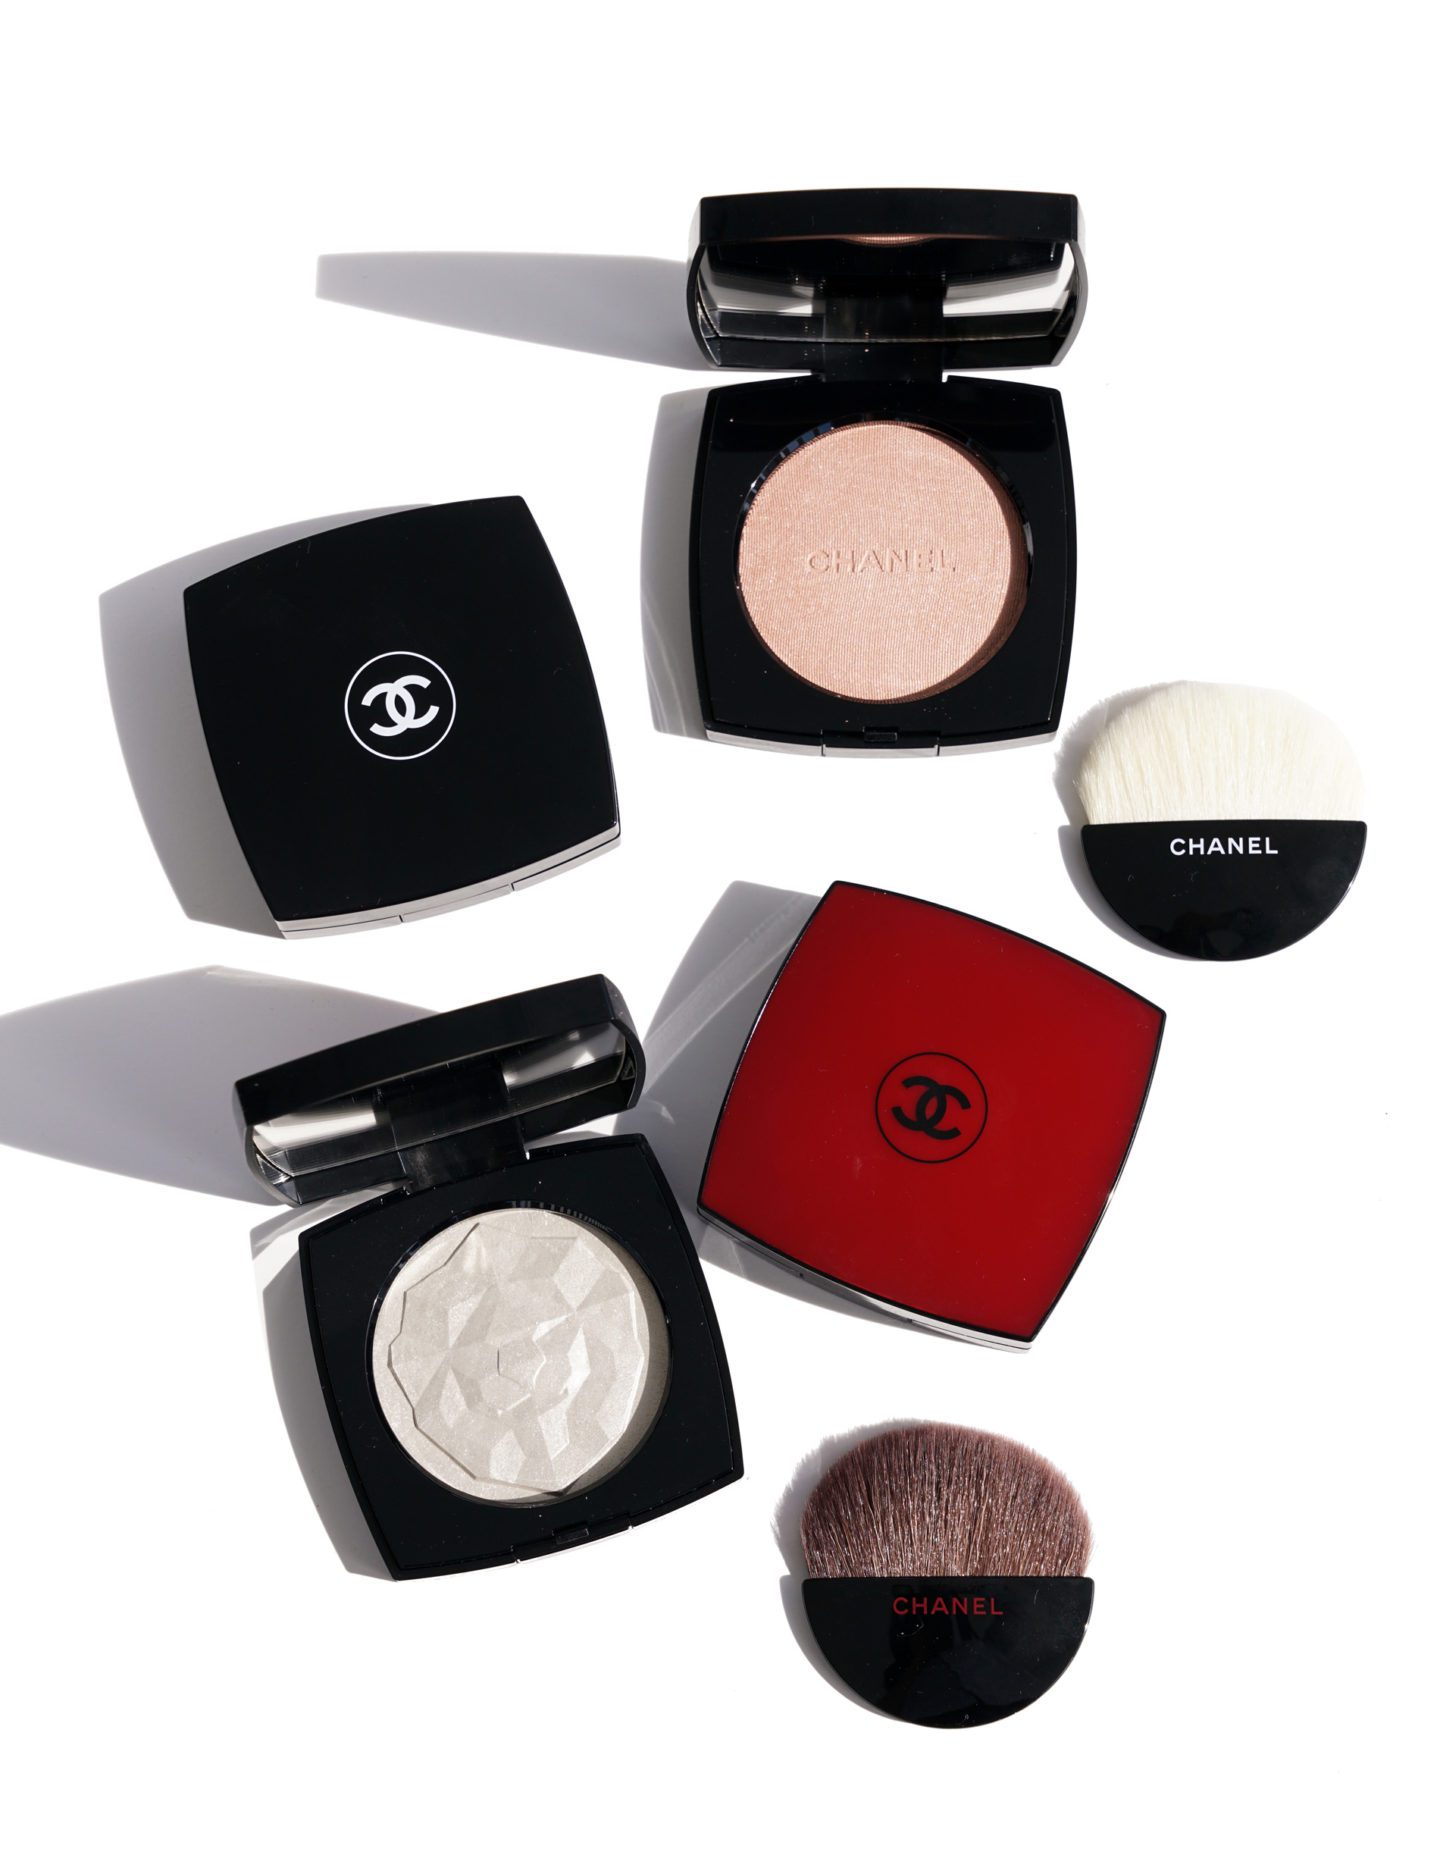 Chanel Highlighters Poudre Lumiere in Ivory Gold and Rosy Gold, Le Signe du Lion in Or Blanc and Or Rose Review | The Beauty Look Book